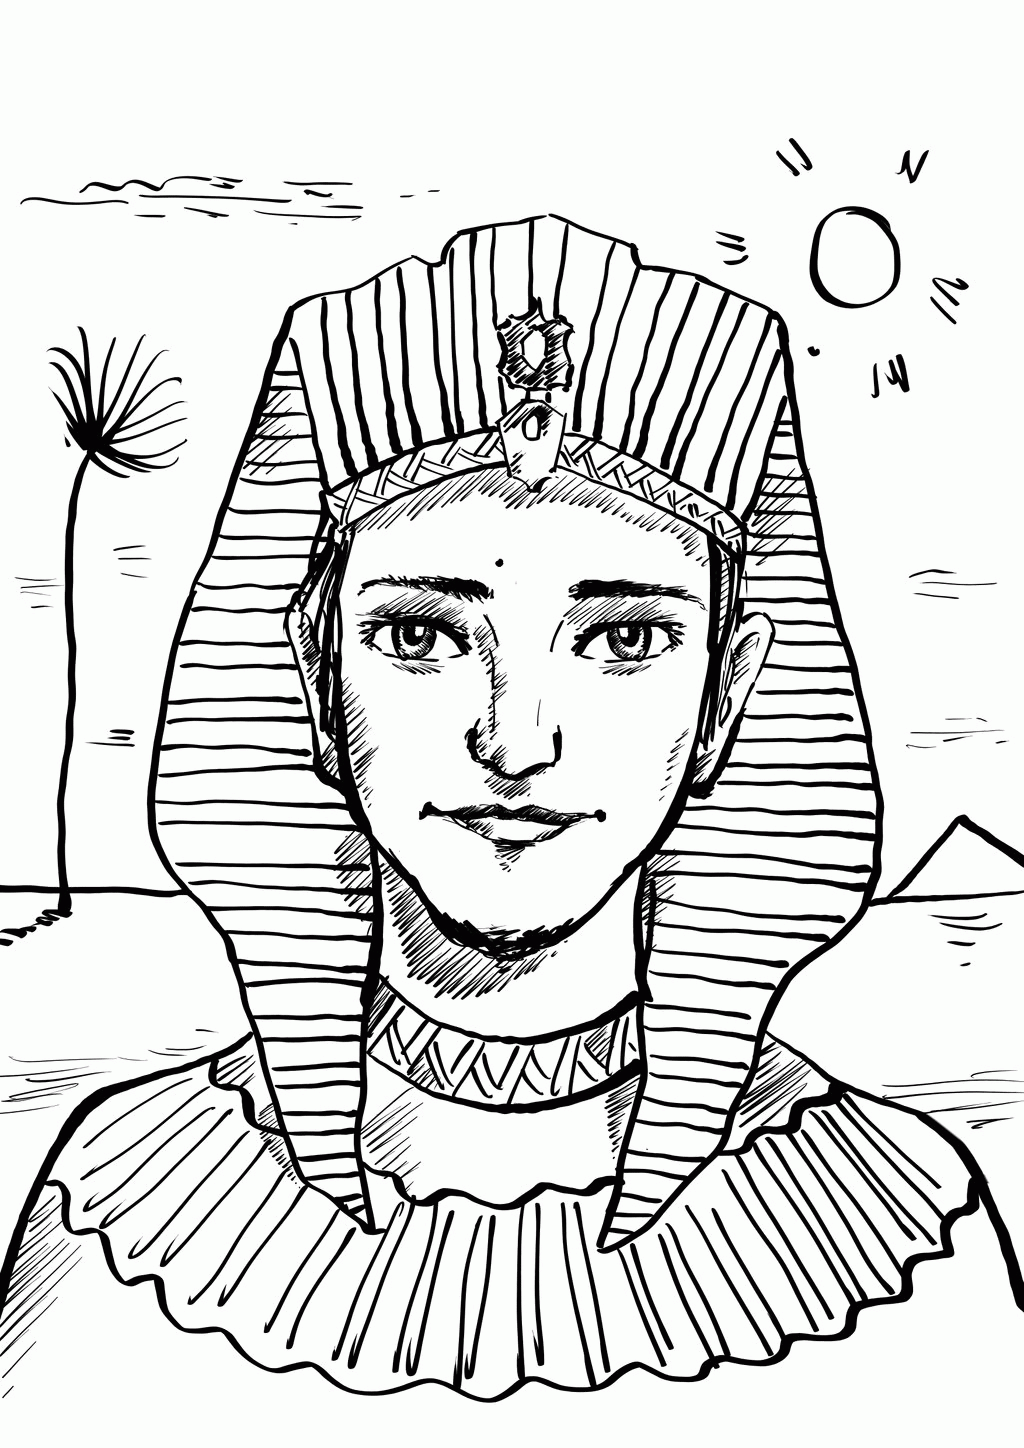 20 Pics Of Joseph In Egypt Coloring Pages   Coloring Pages, Bible ...